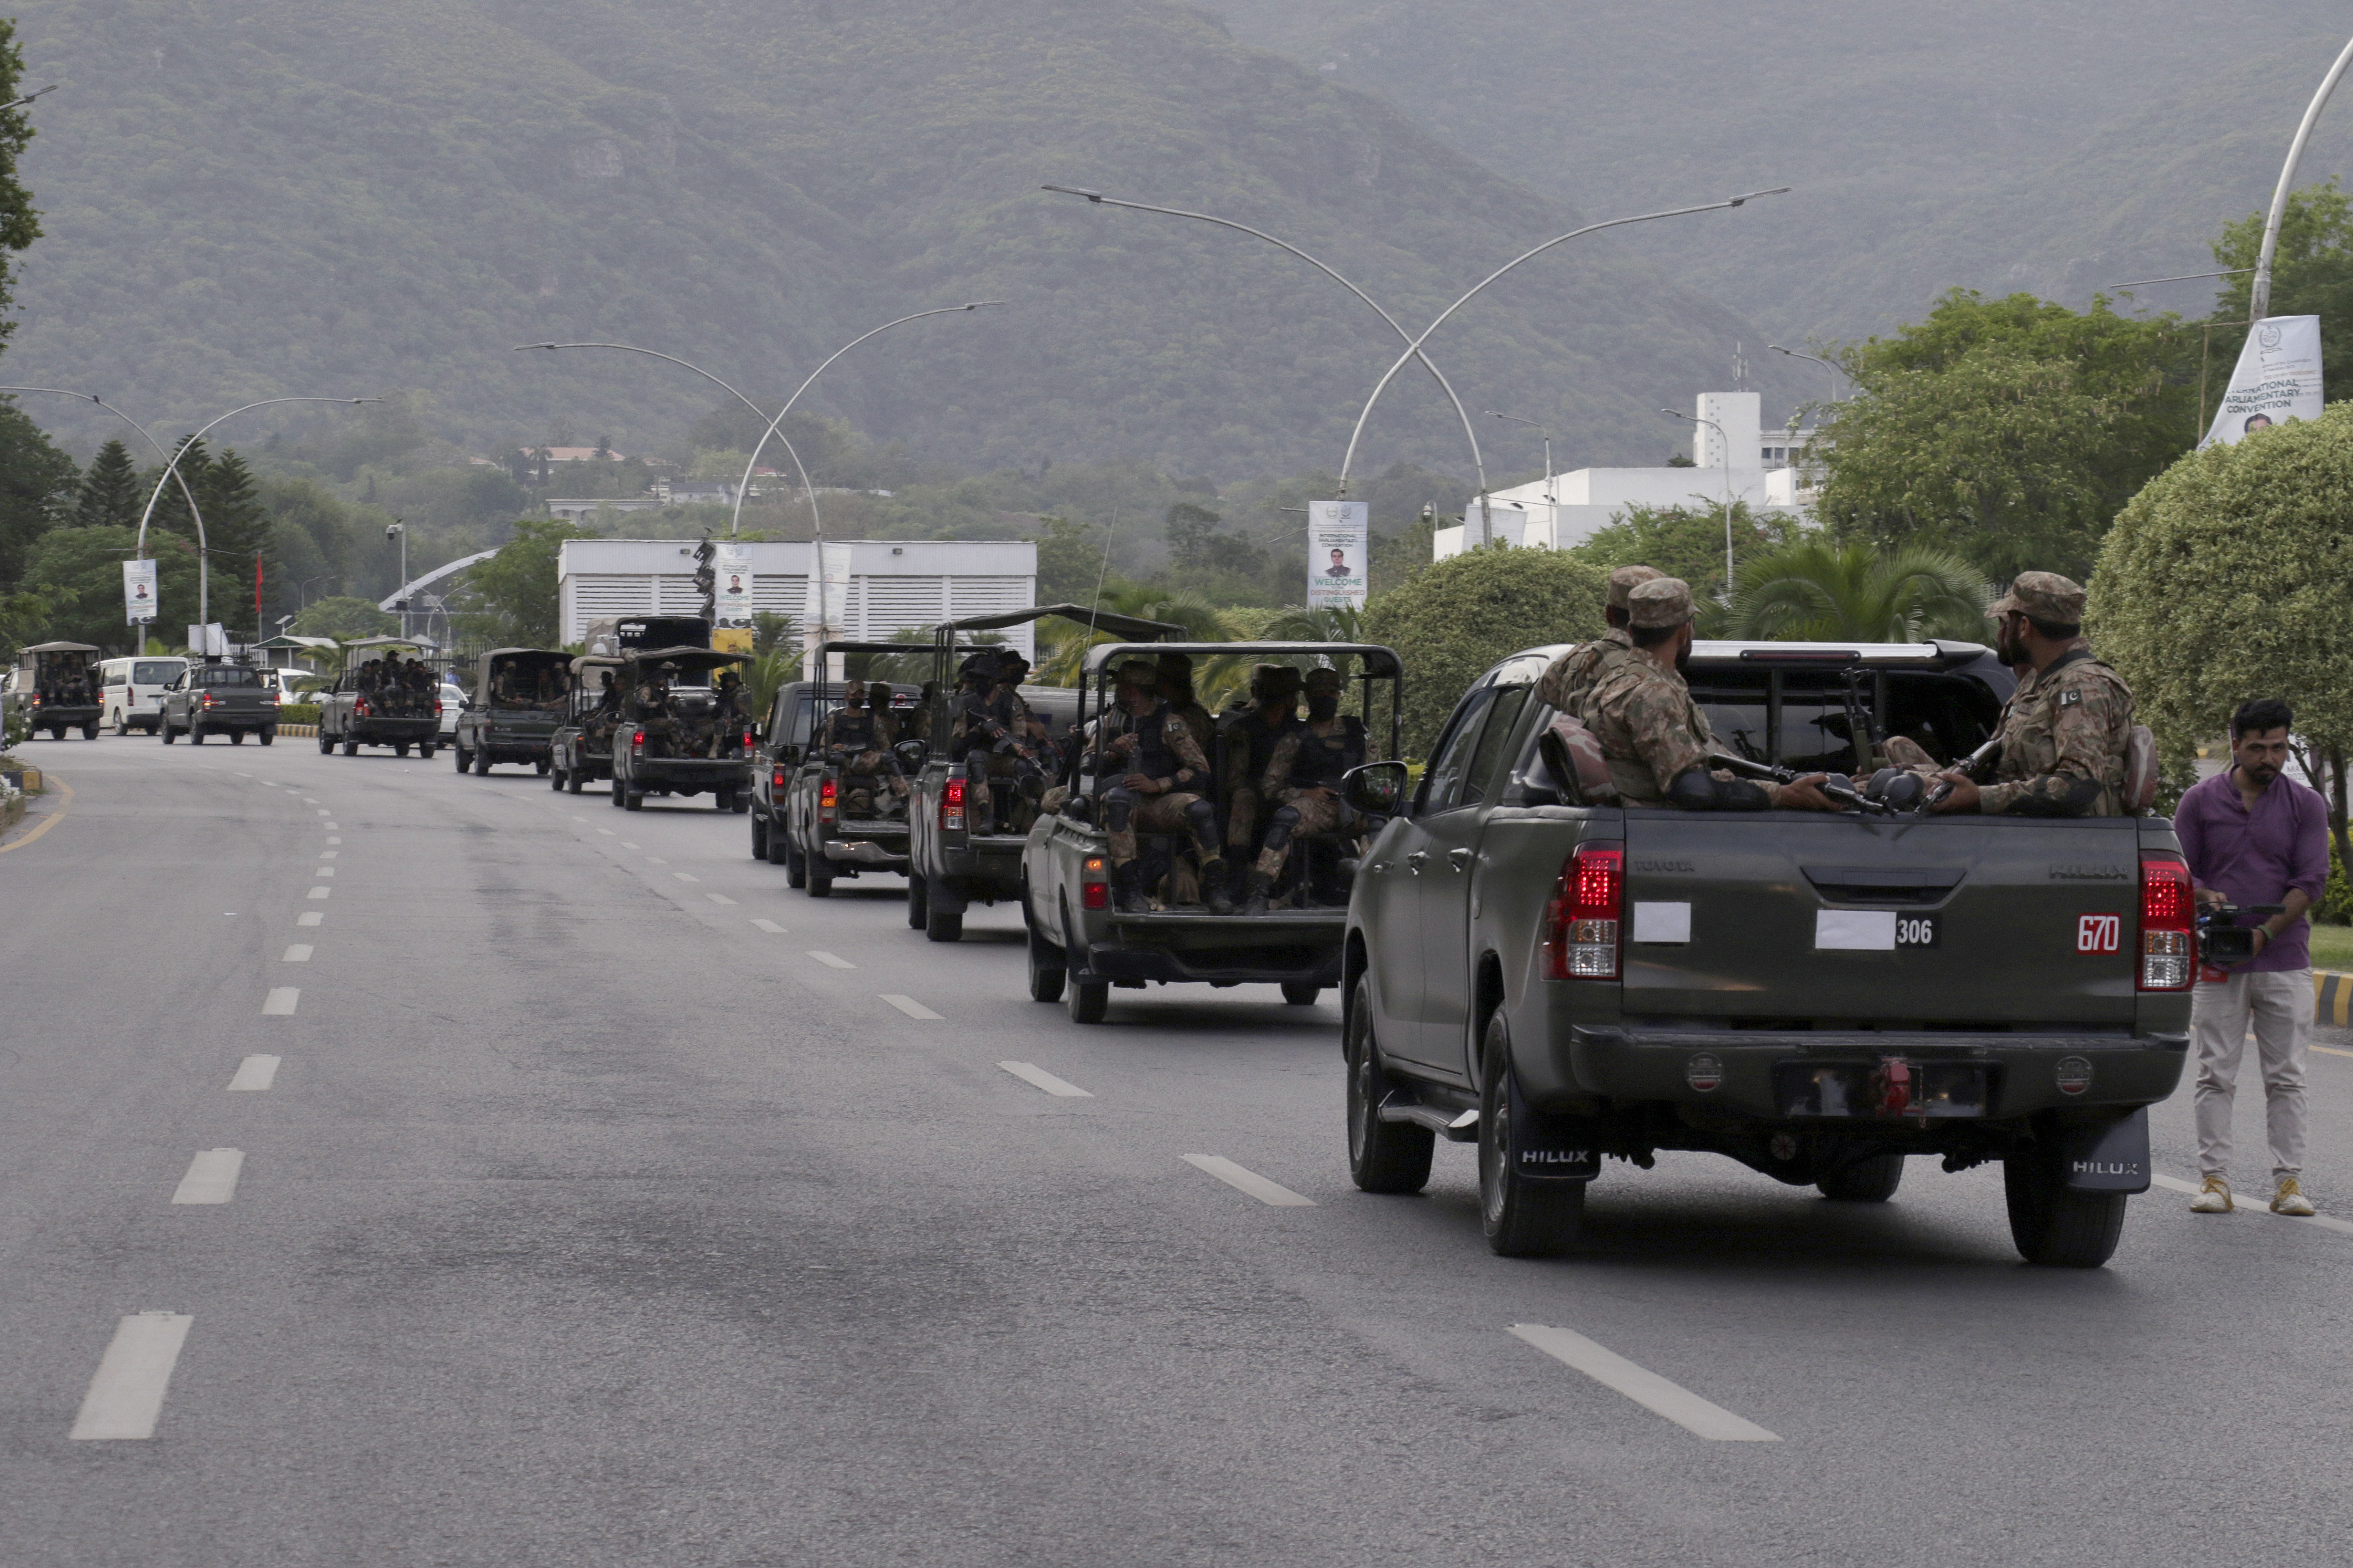 A convey of army troops patrol at a road to ensure security after clashes between police and supporters of Pakistan's former Prime Minister Imran Khan, in Islamabad, Pakistan, Thursday, May 11, 2023.   